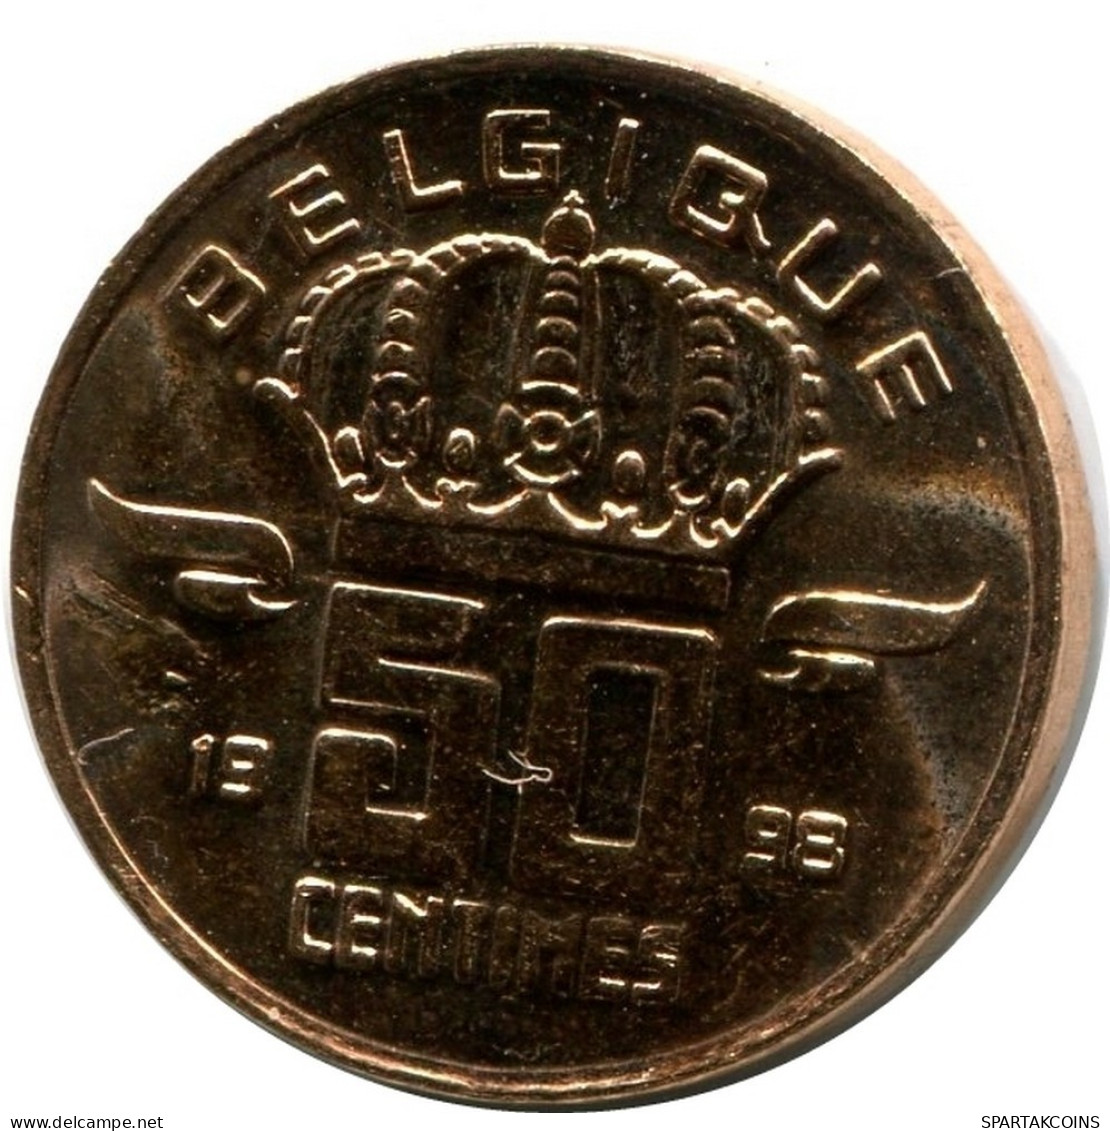 50 CENTIMES 1998 FRENCH Text BELGIUM Coin UNC #M10014.U.A - 50 Cent